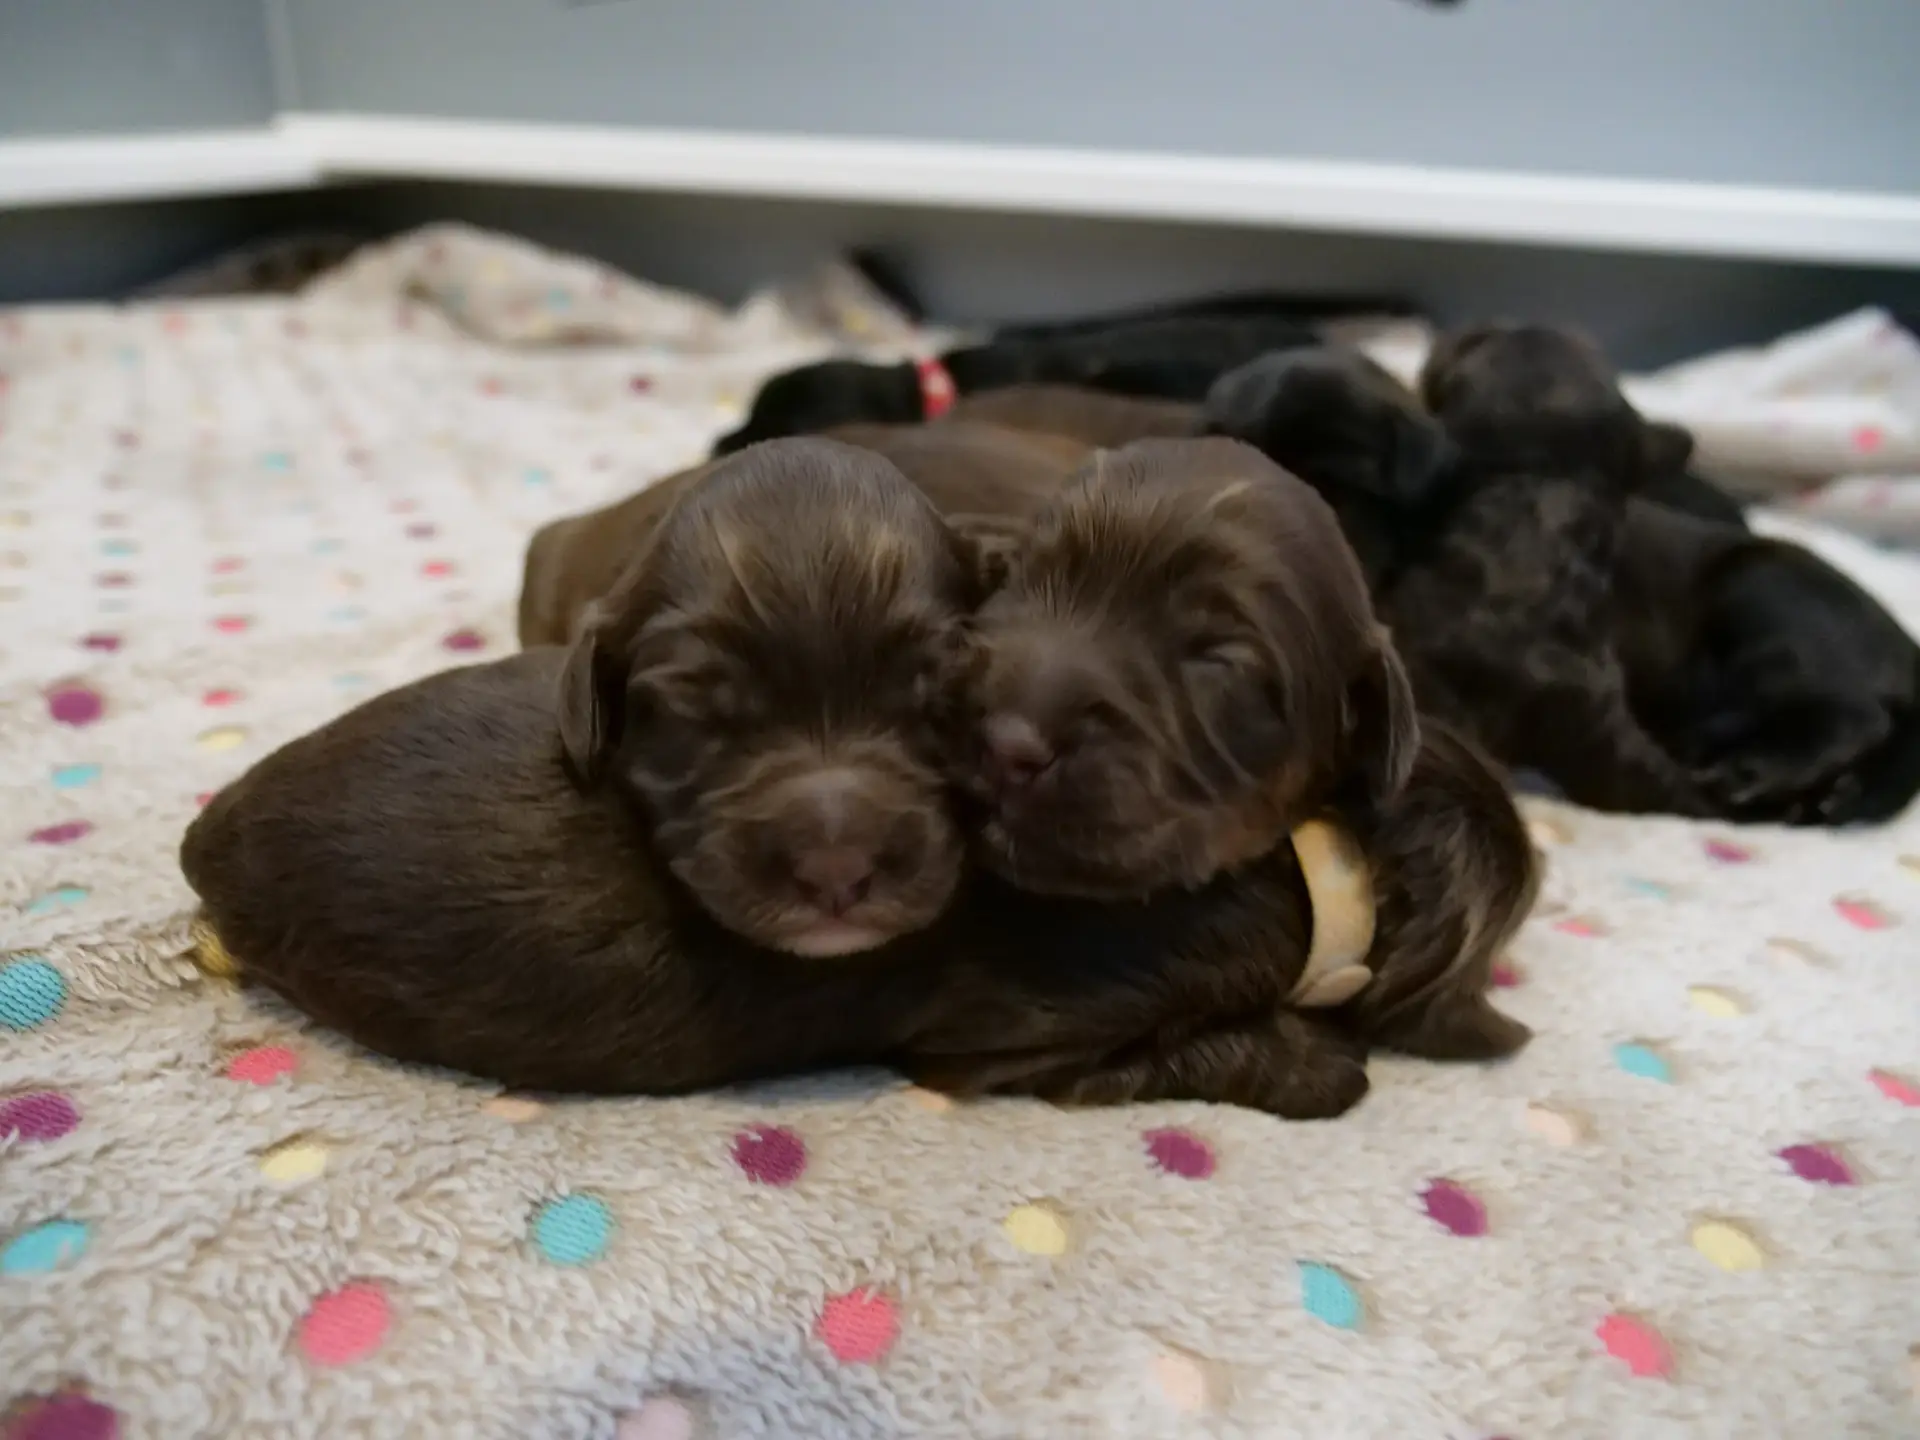 three 1-week old chocolate labradoodle puppies. One is laying across a grey blanket with mulitcolored spots, his back to the camera. 2 more are resting their heads on his back, facing the camera. You can see streaks of caramel tones in their dark brown coats.